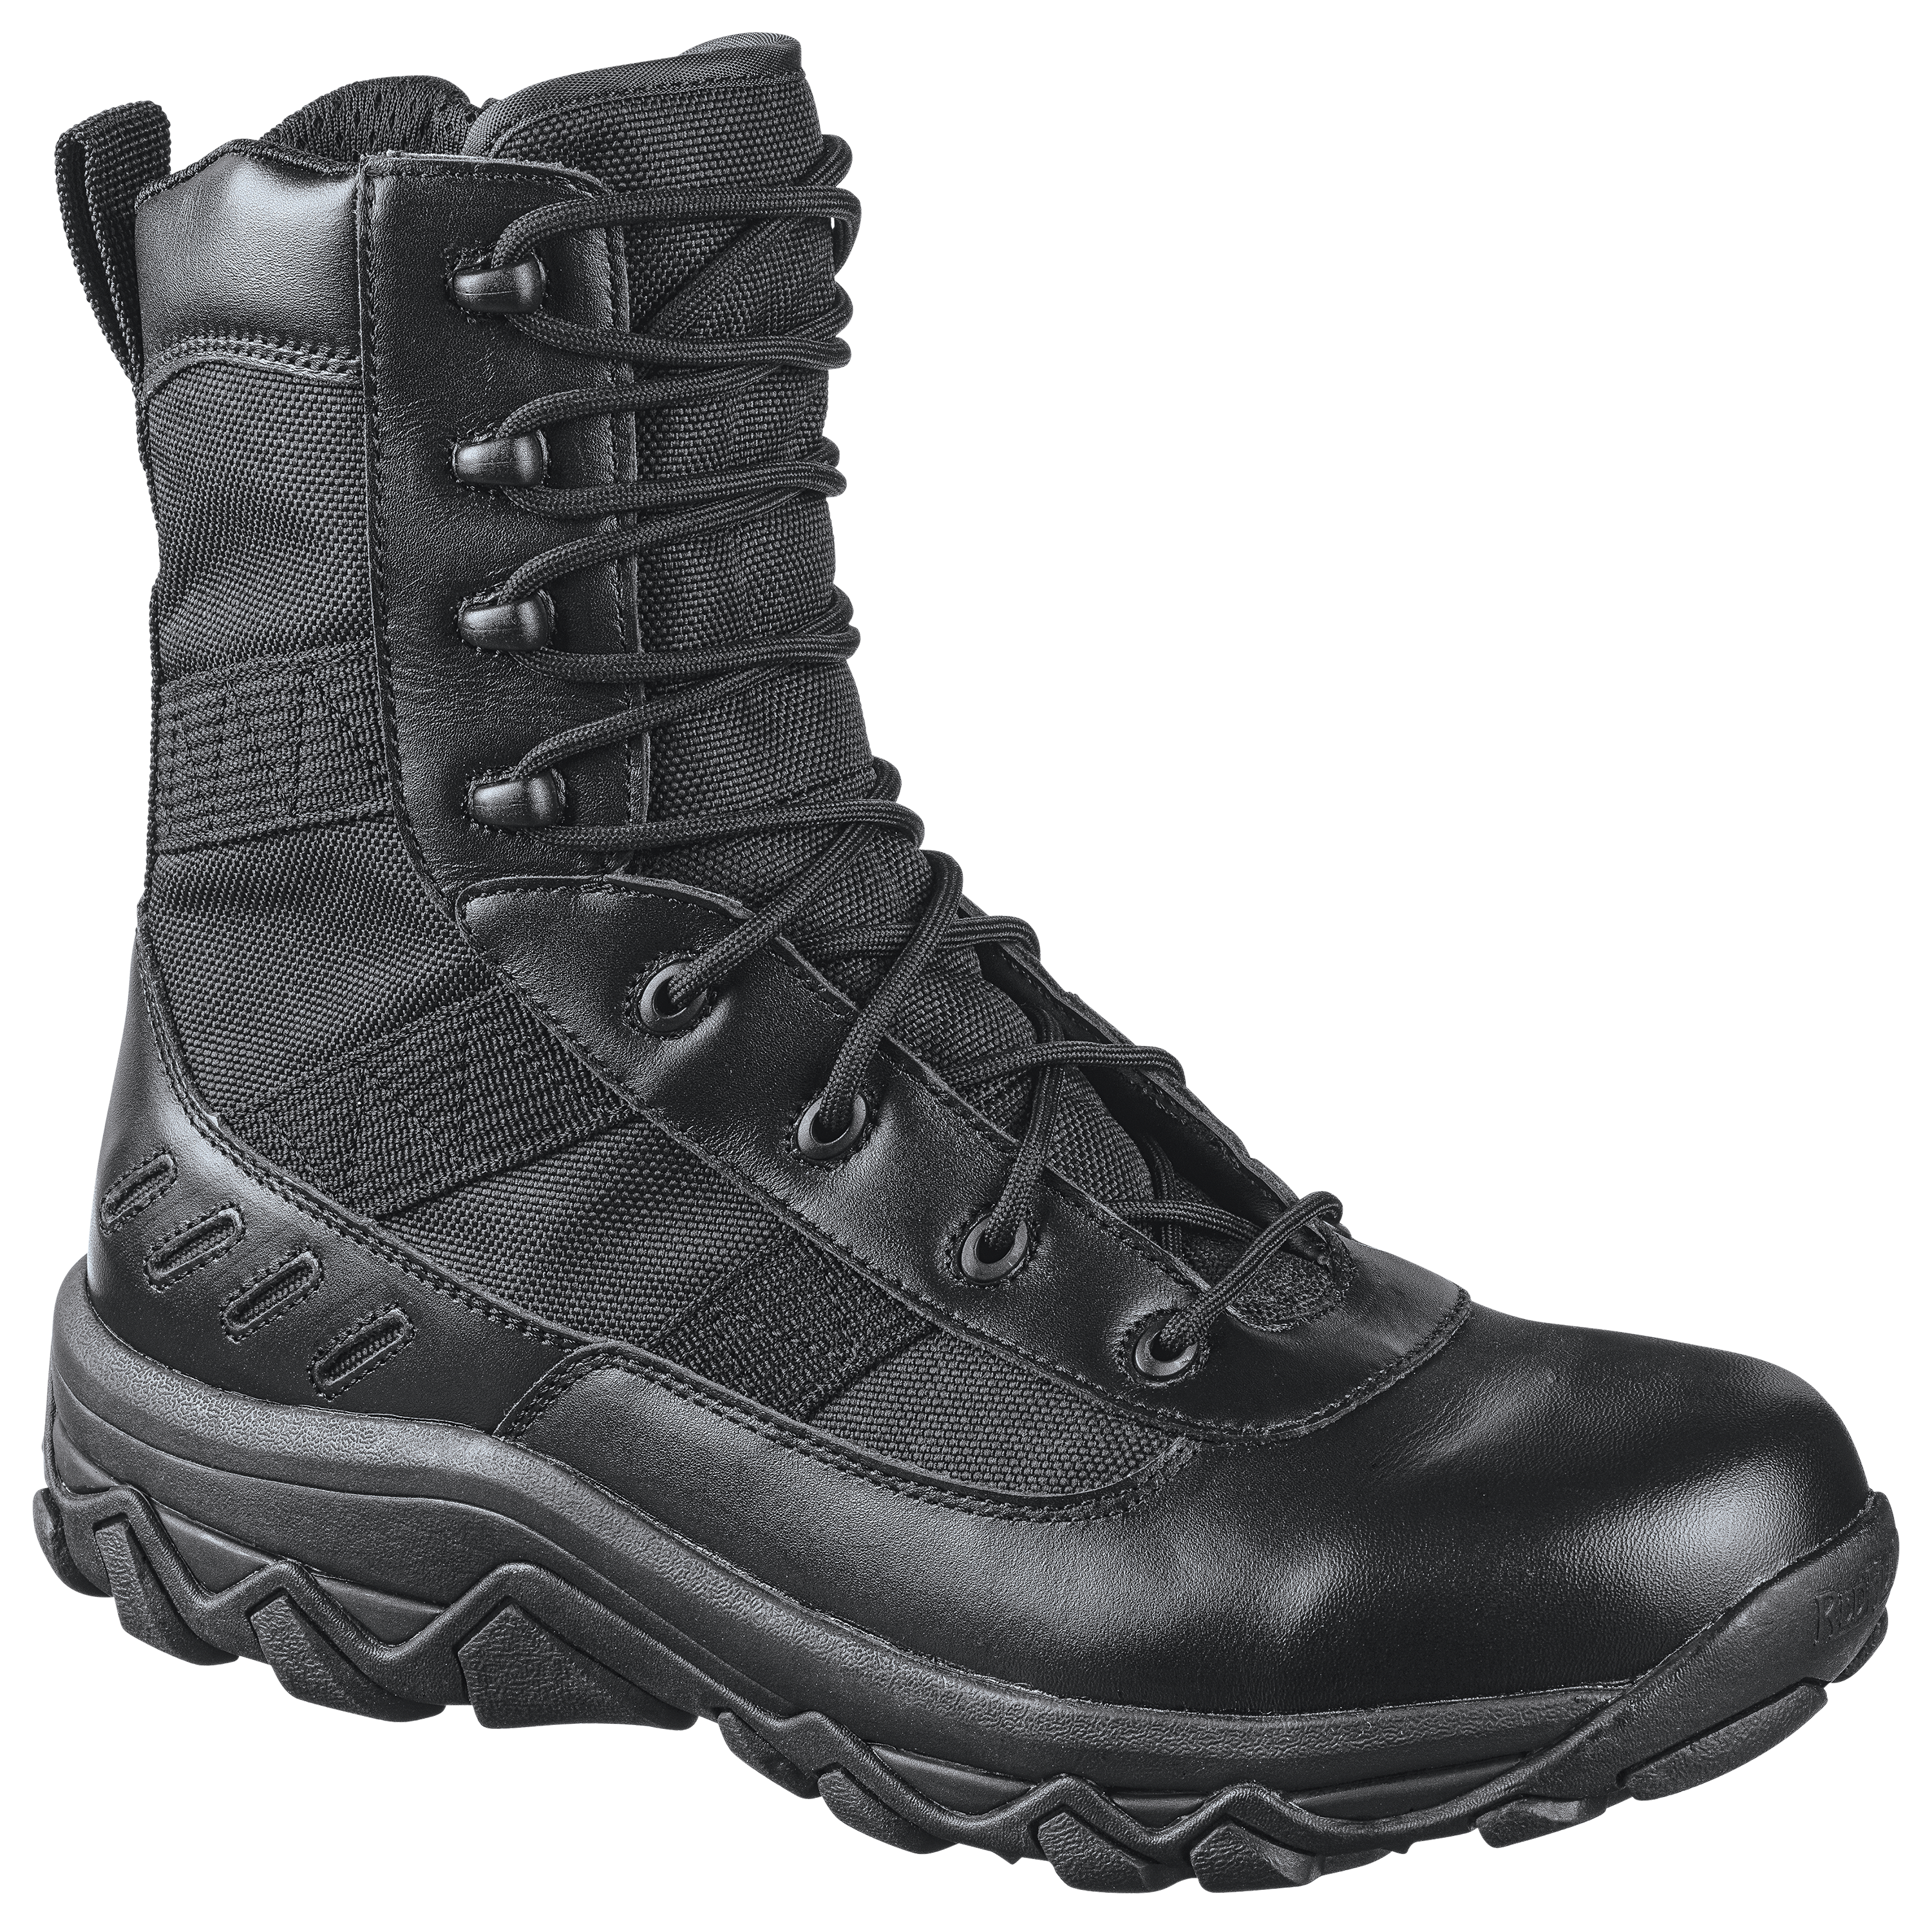 RedHead RCT Warrior Waterproof Side Zip Tactical Duty Boots for